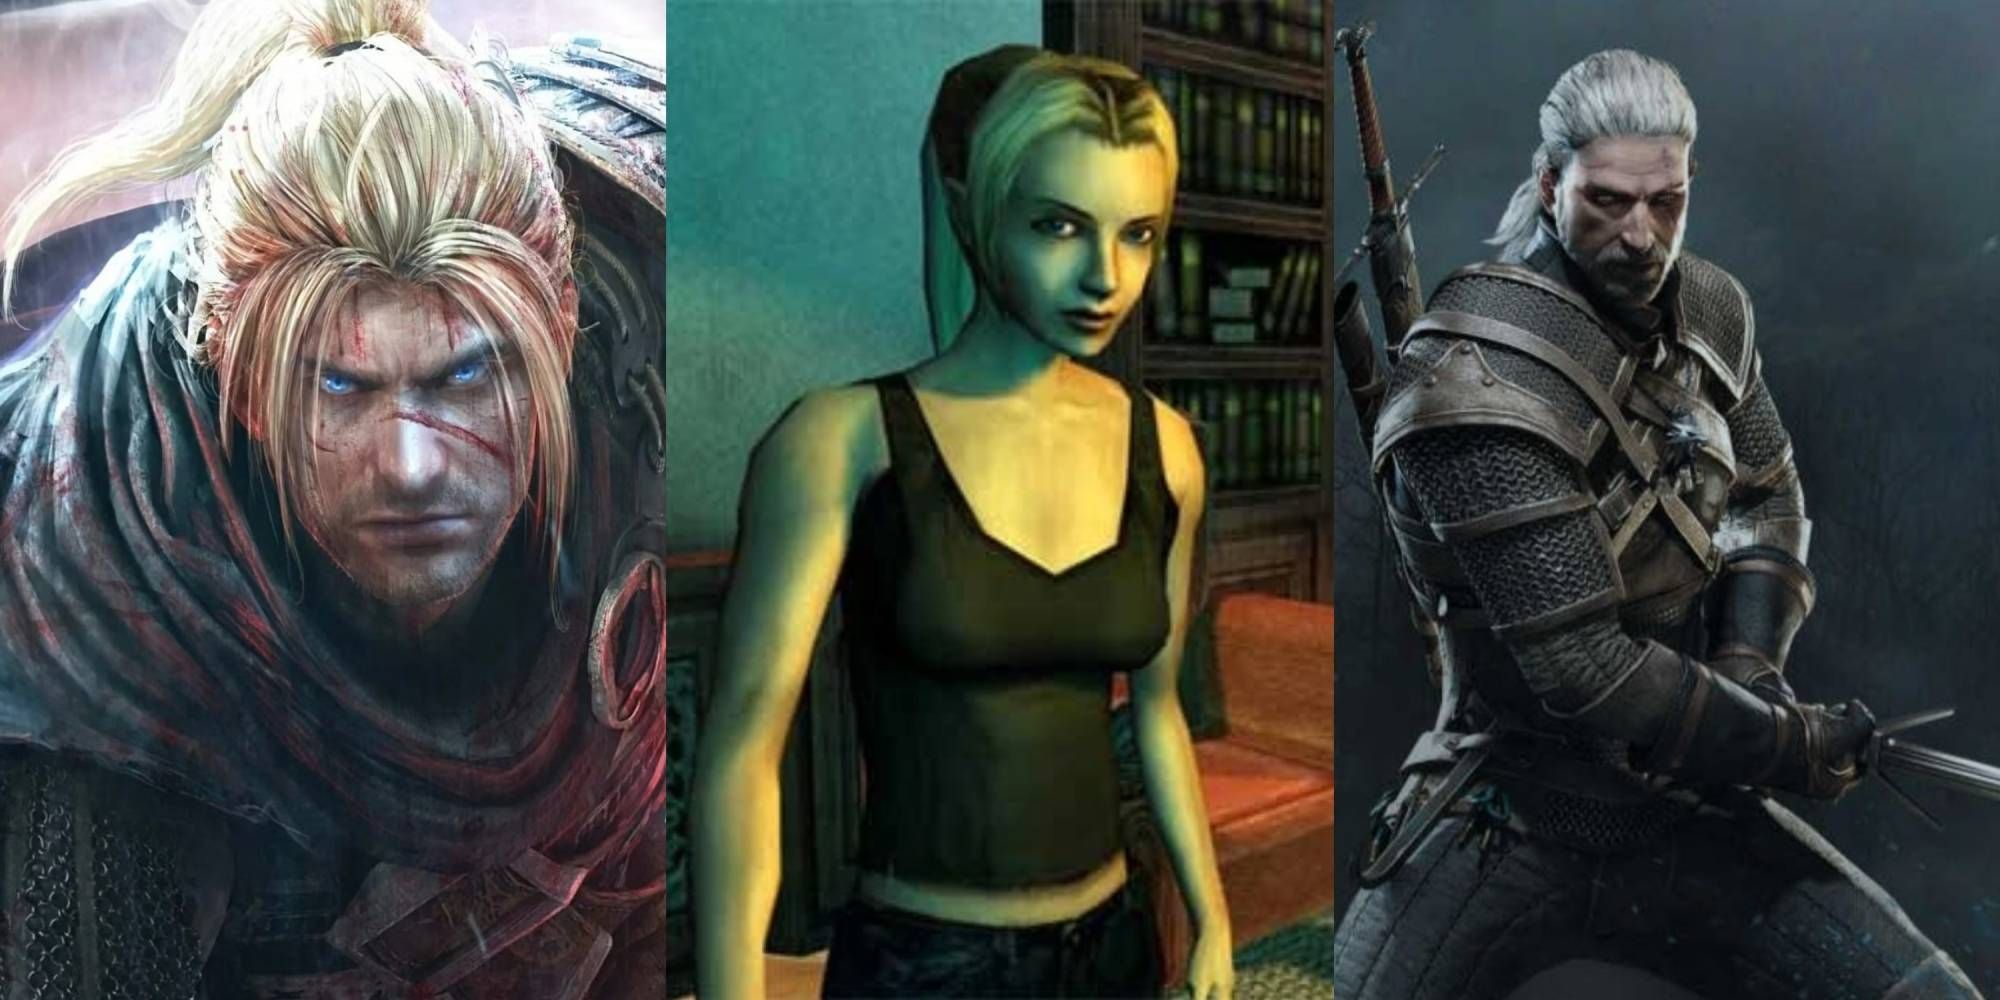 Hardest RPGs Ever Made, Ranked